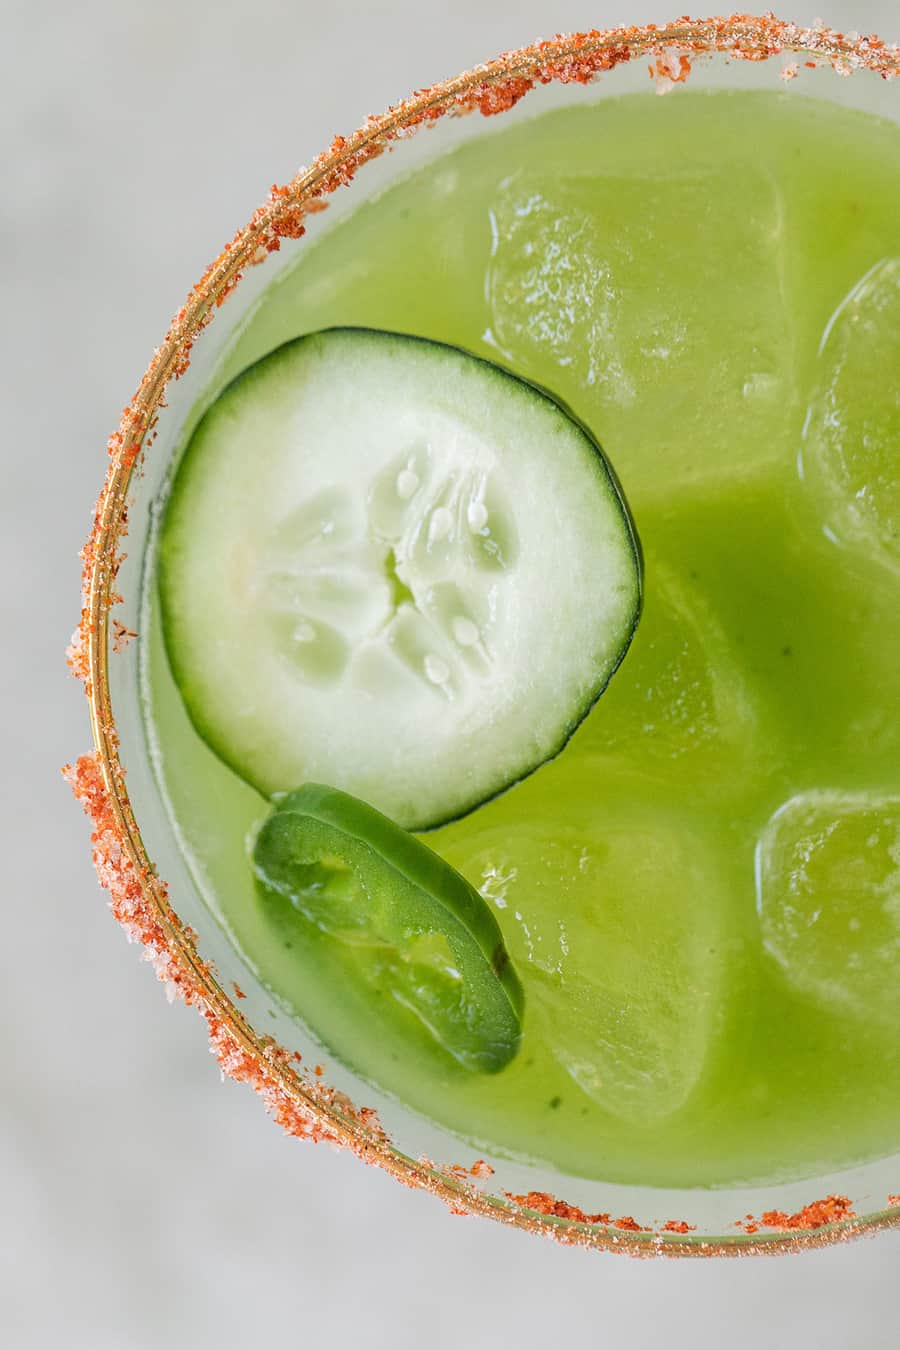 Spicy green cocktail with cucumber and a spicy rimmed glass